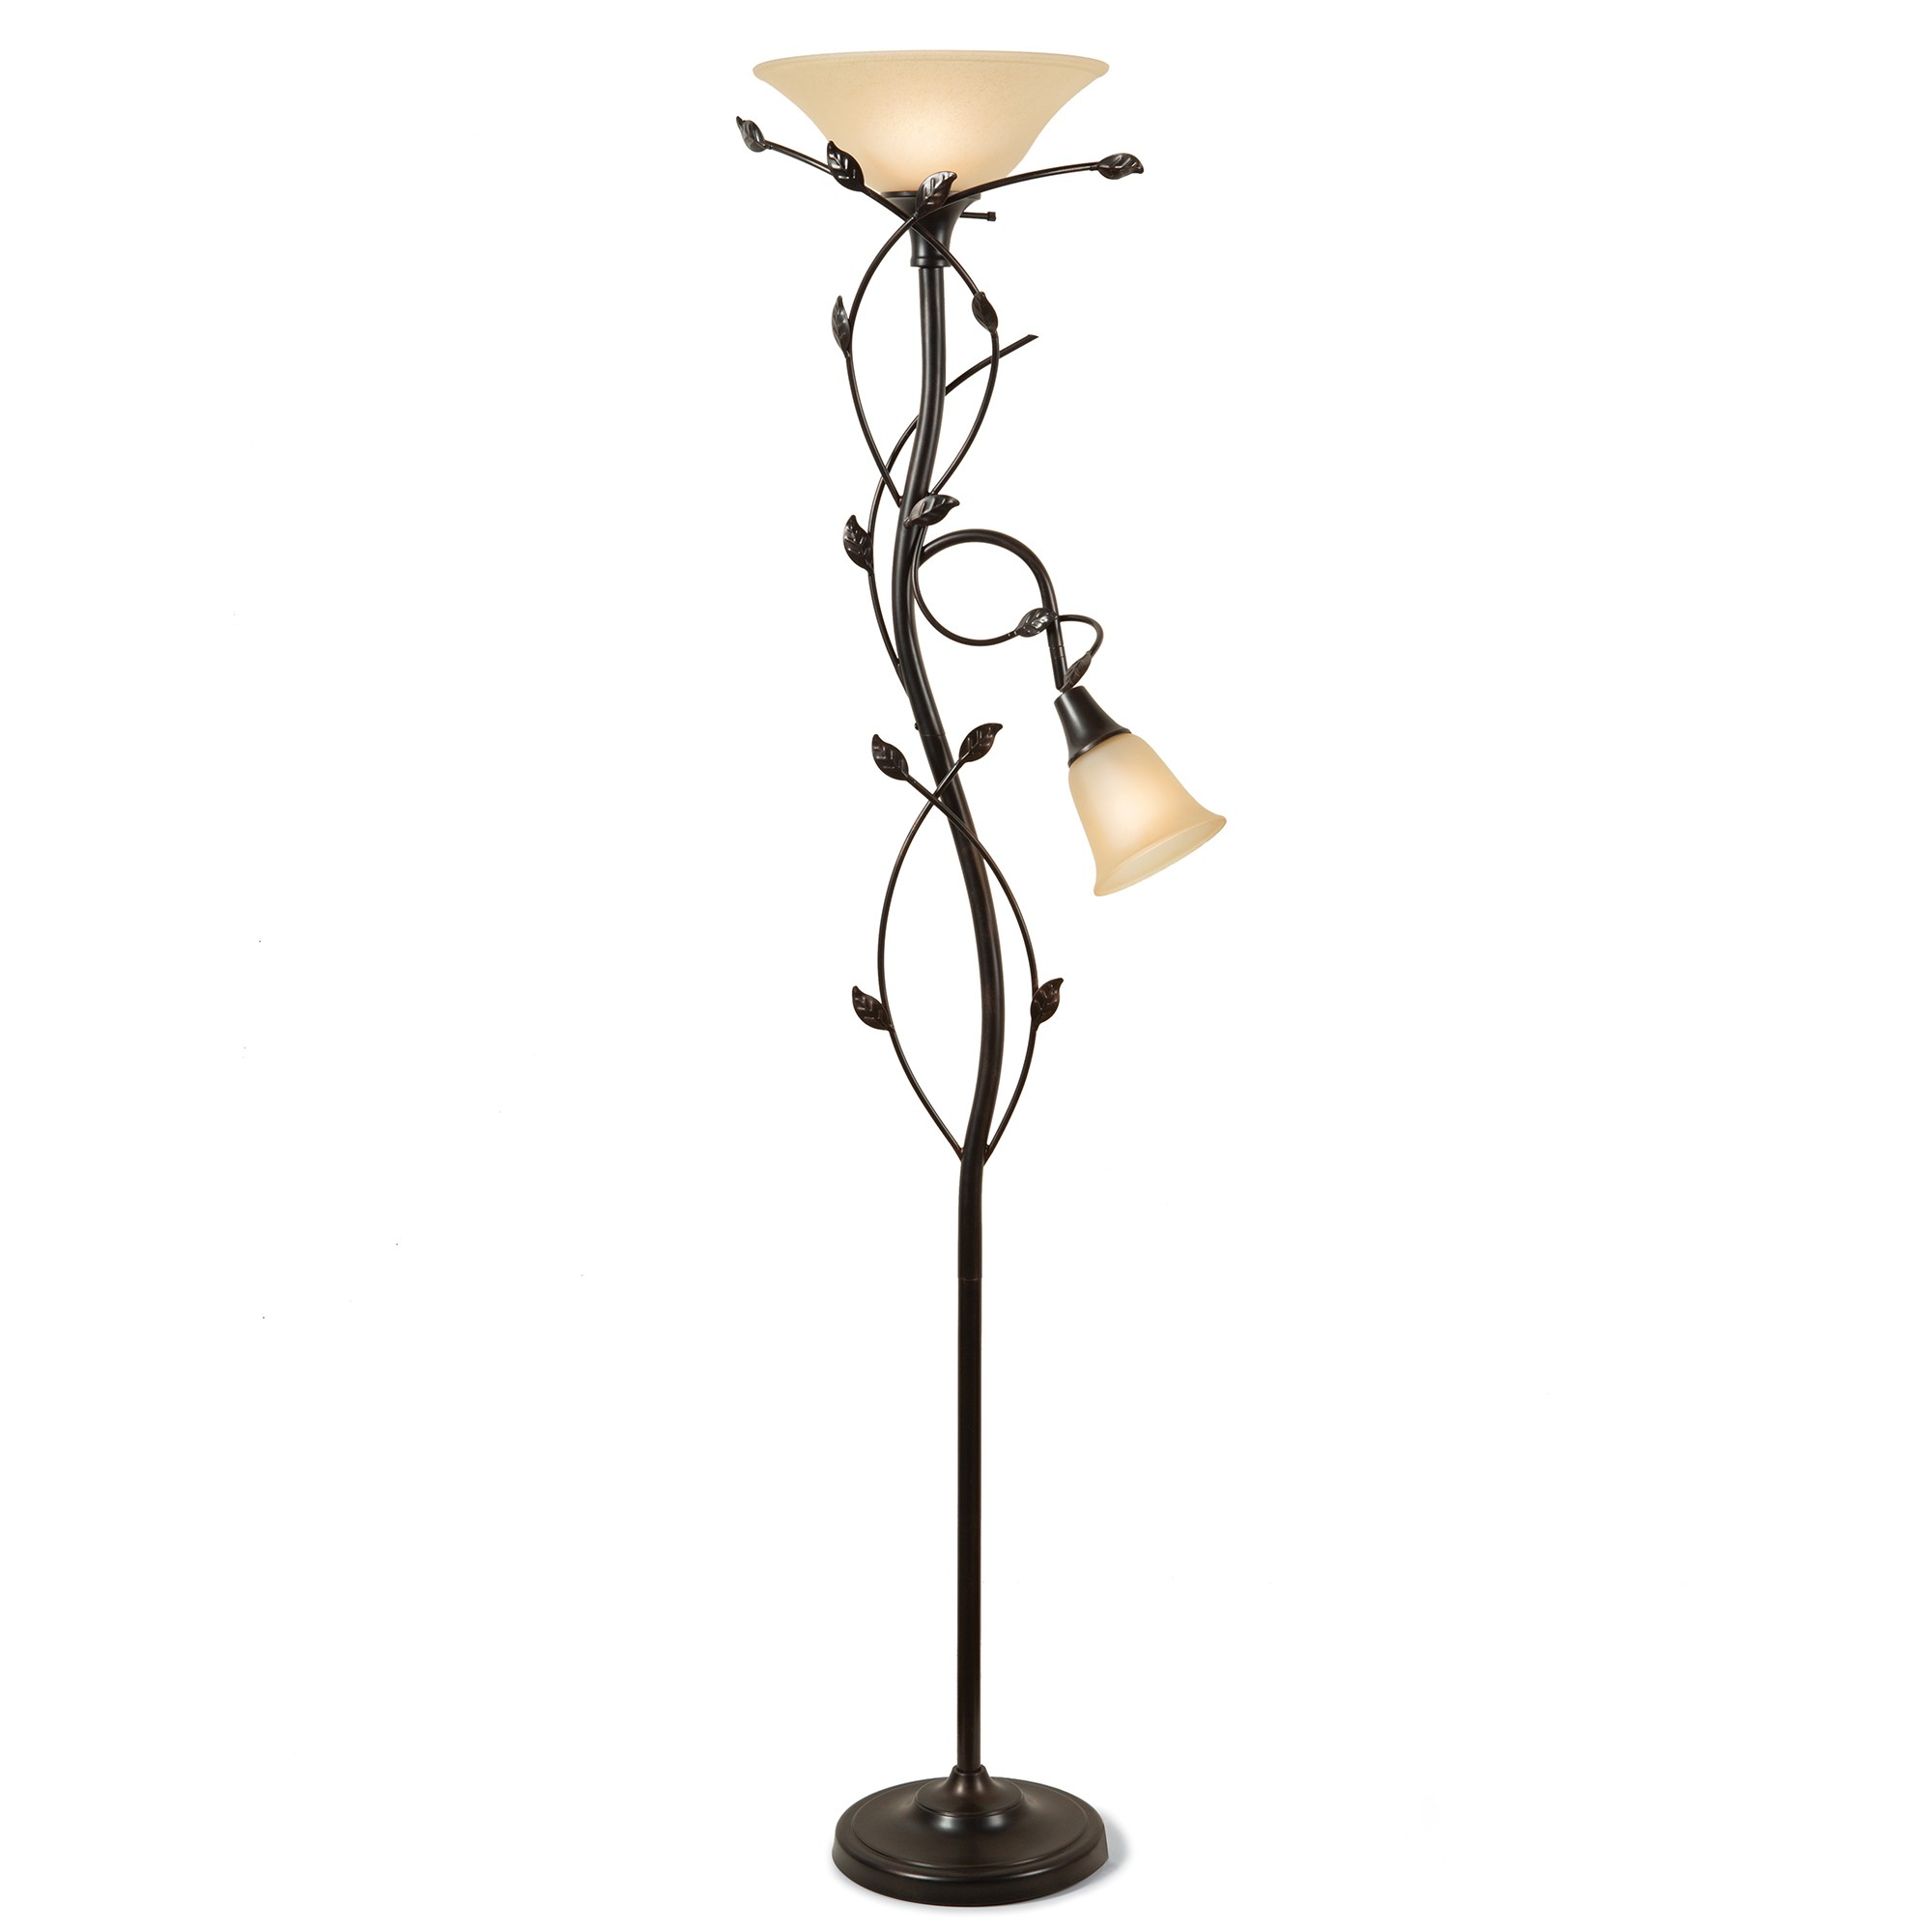 Torchiere Floor Lamp pertaining to size 2000 X 2000